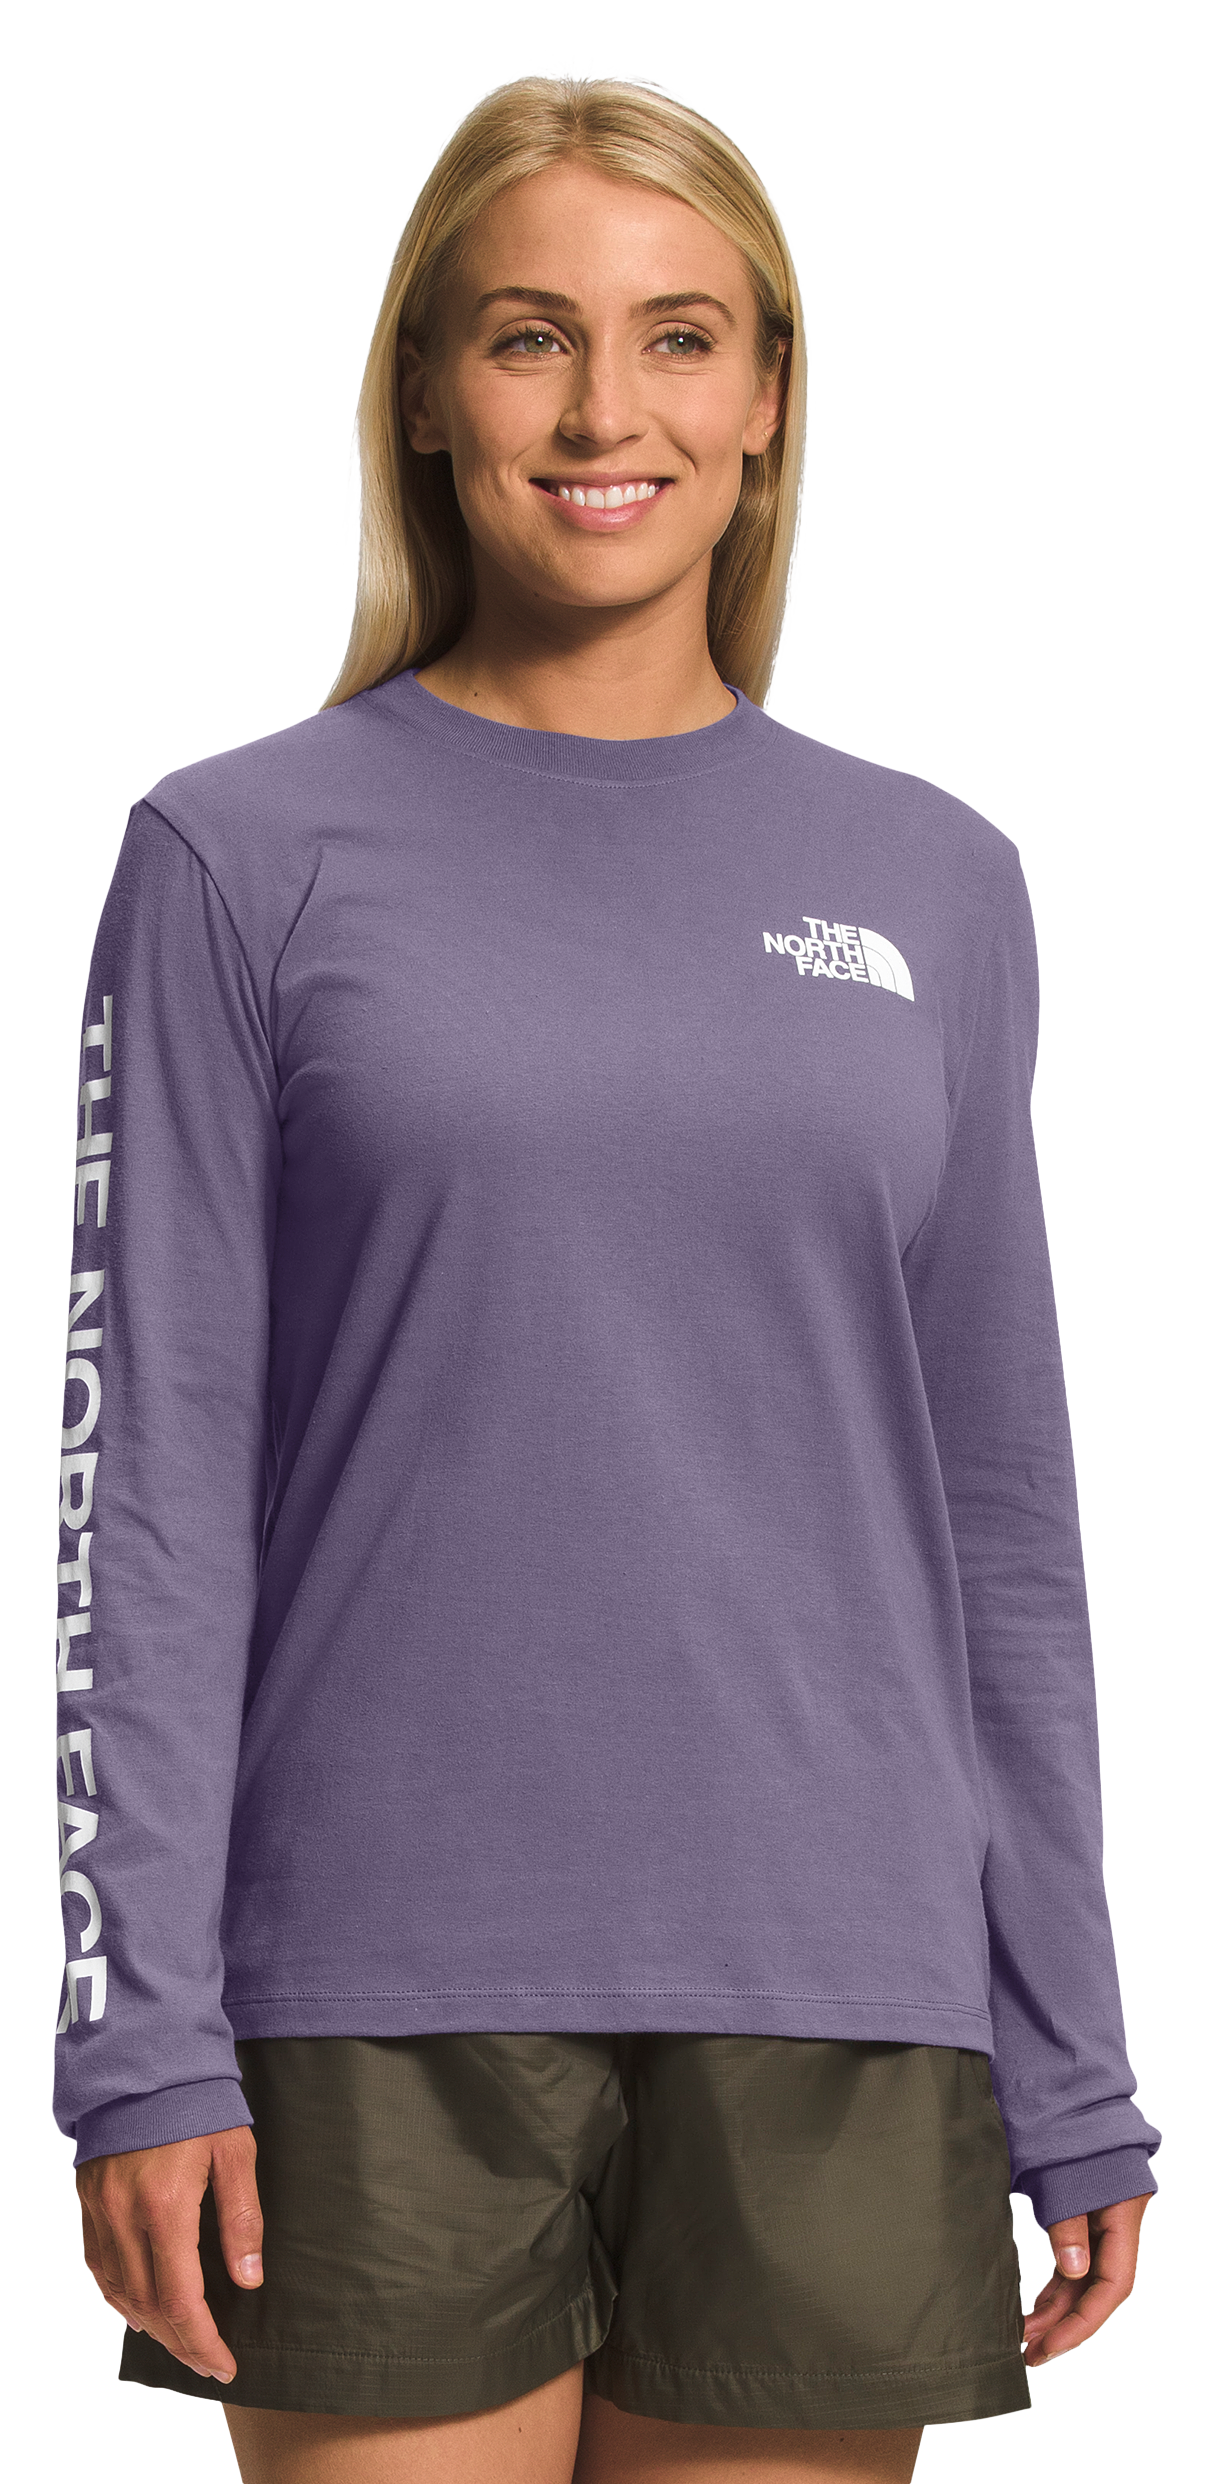 The North Face Hit Graphic Long-Sleeve T-Shirt for Ladies - Lunar Slate/TNF White - M